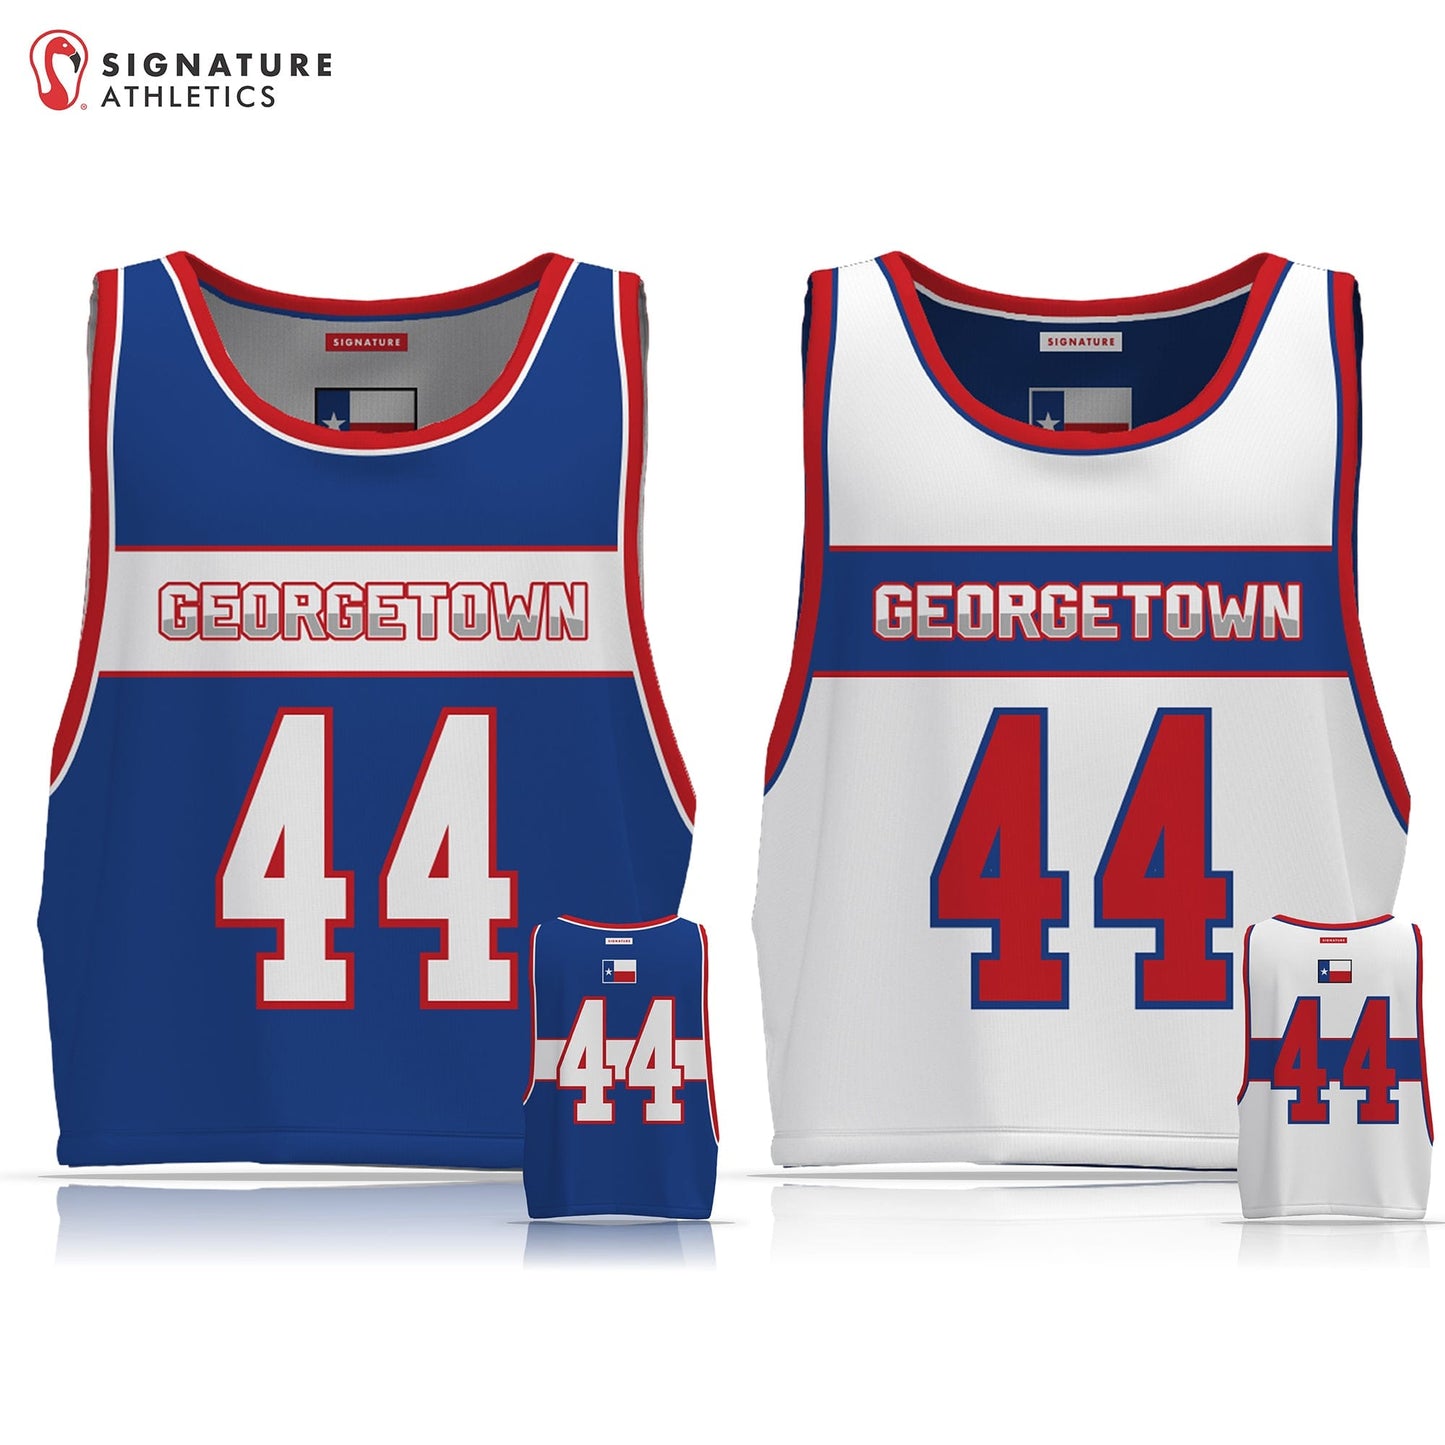 Georgetown Youth Lacrosse Men's Player Reversible Game Pinnie: 1st/2nd (Bantam) Signature Lacrosse